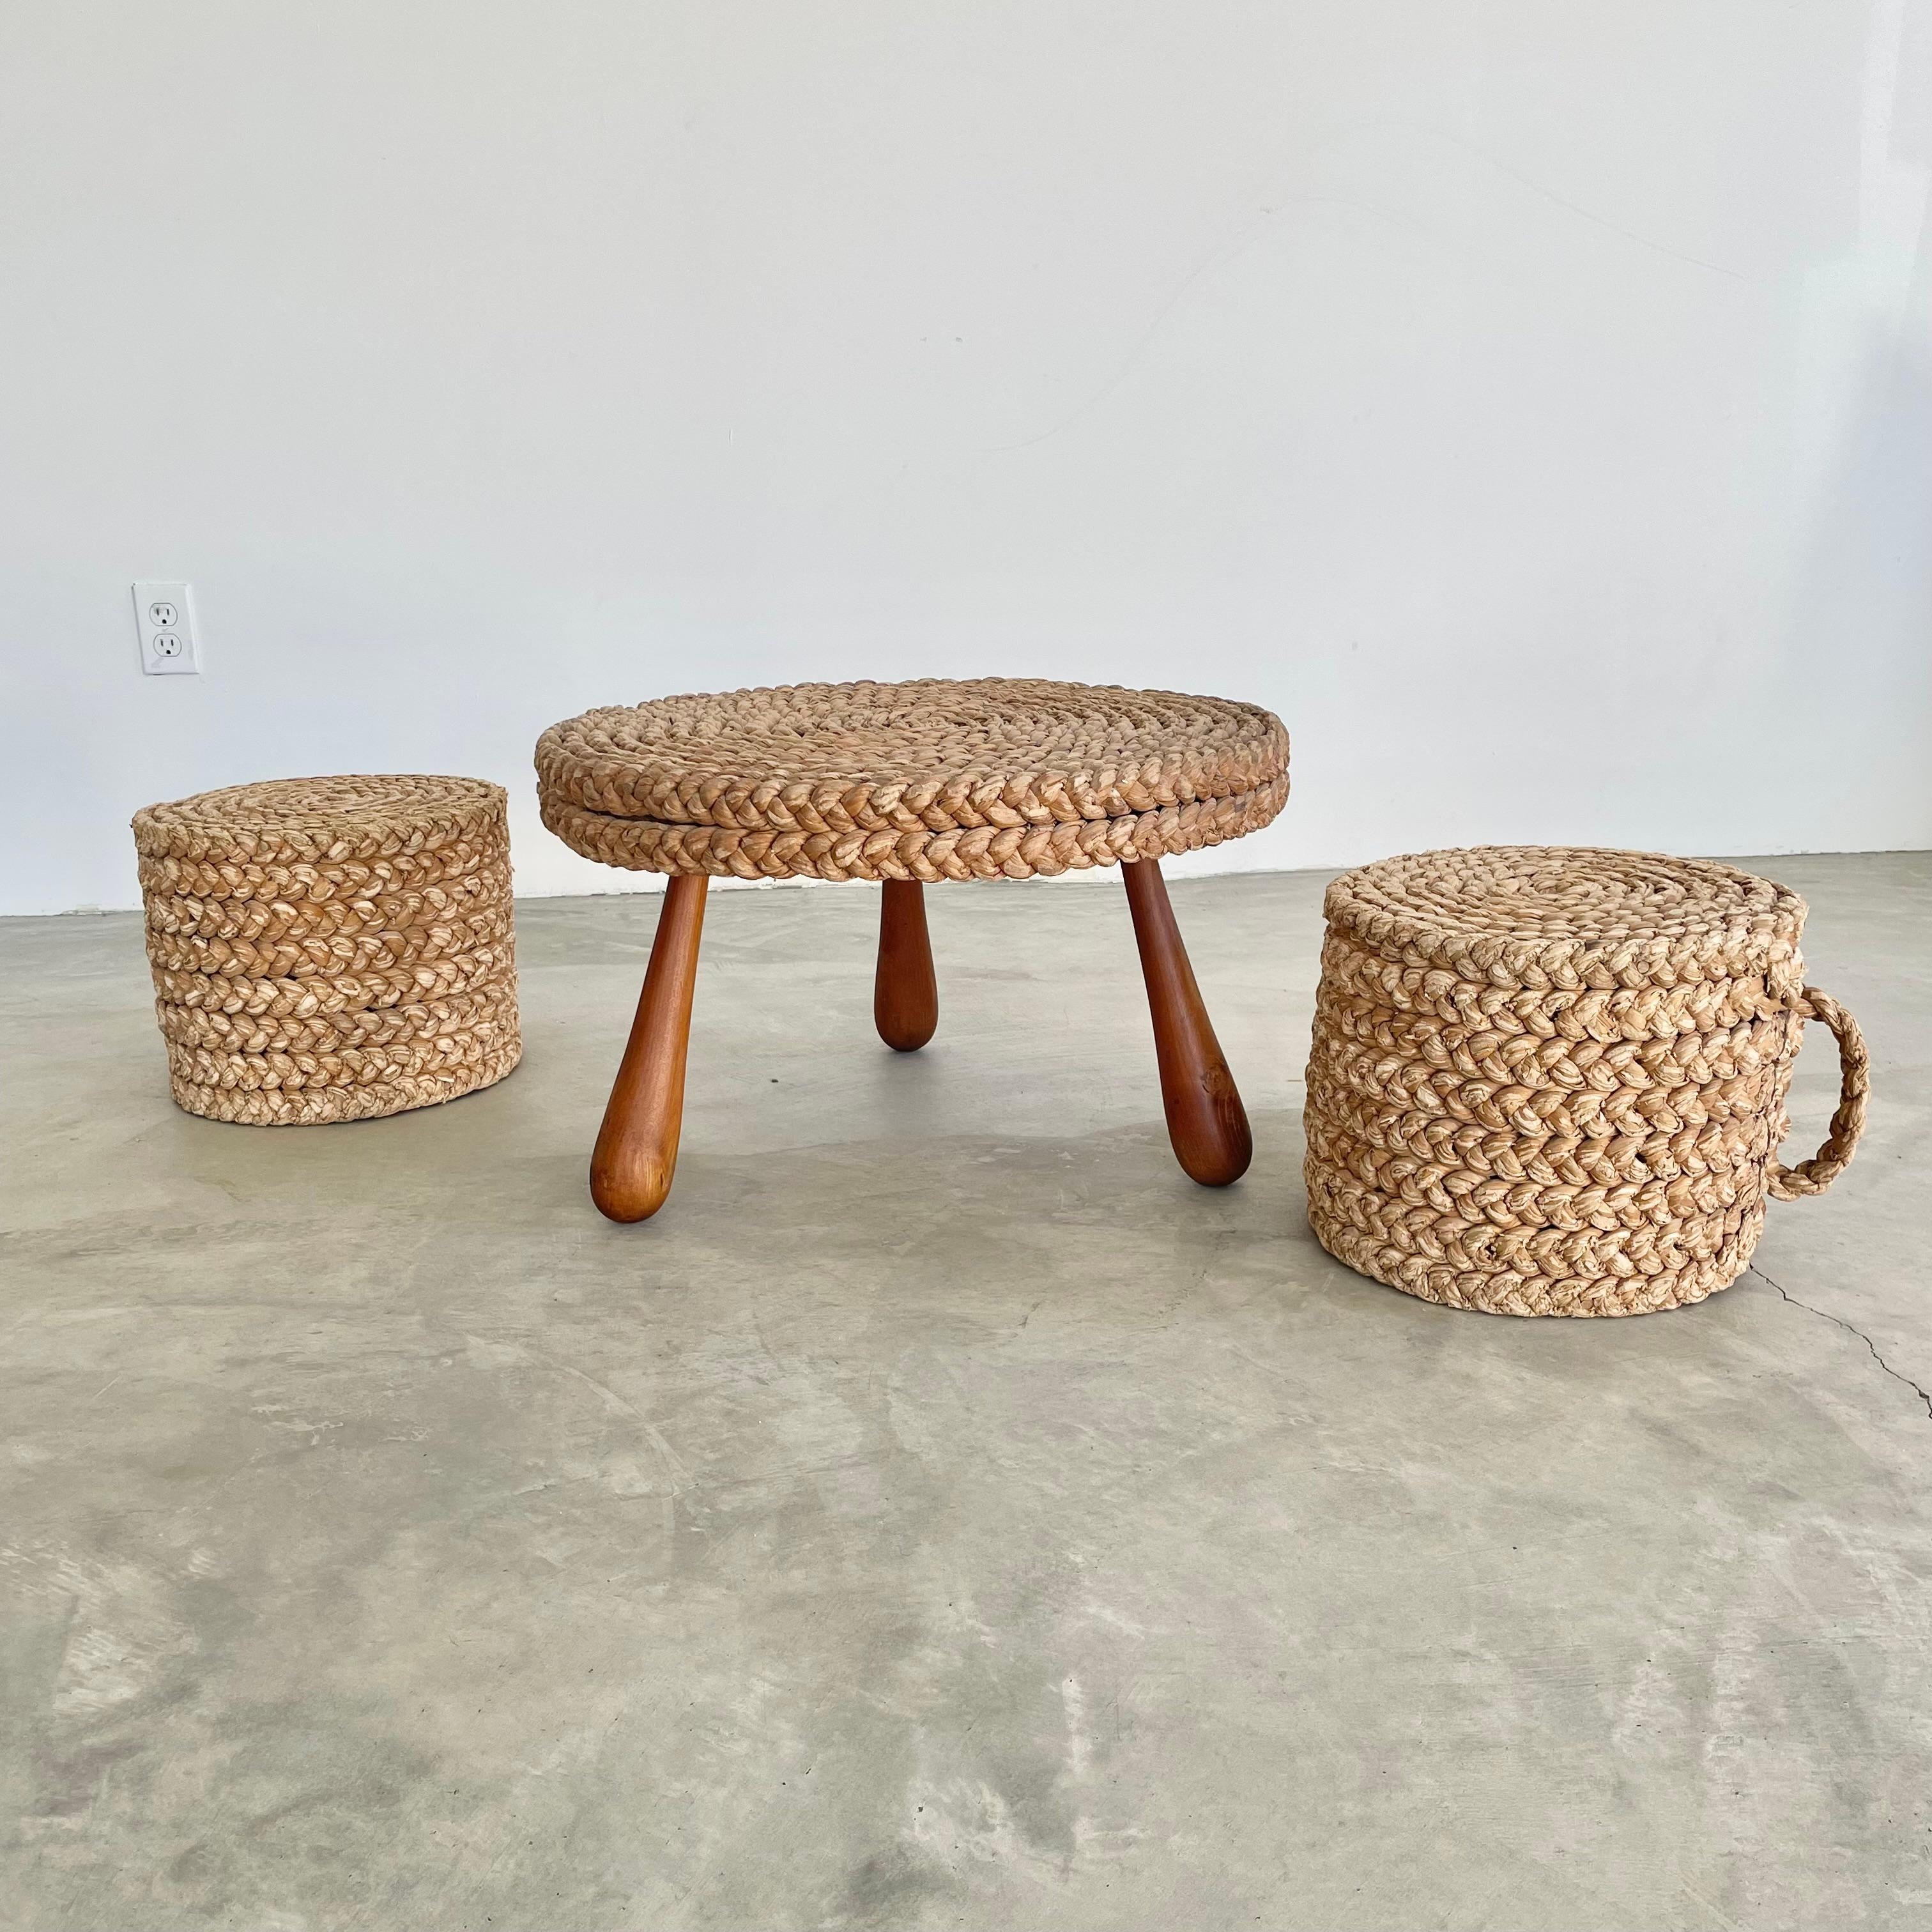 Rope and Wood Table with Two Nesting Stools, 1960s France For Sale 5